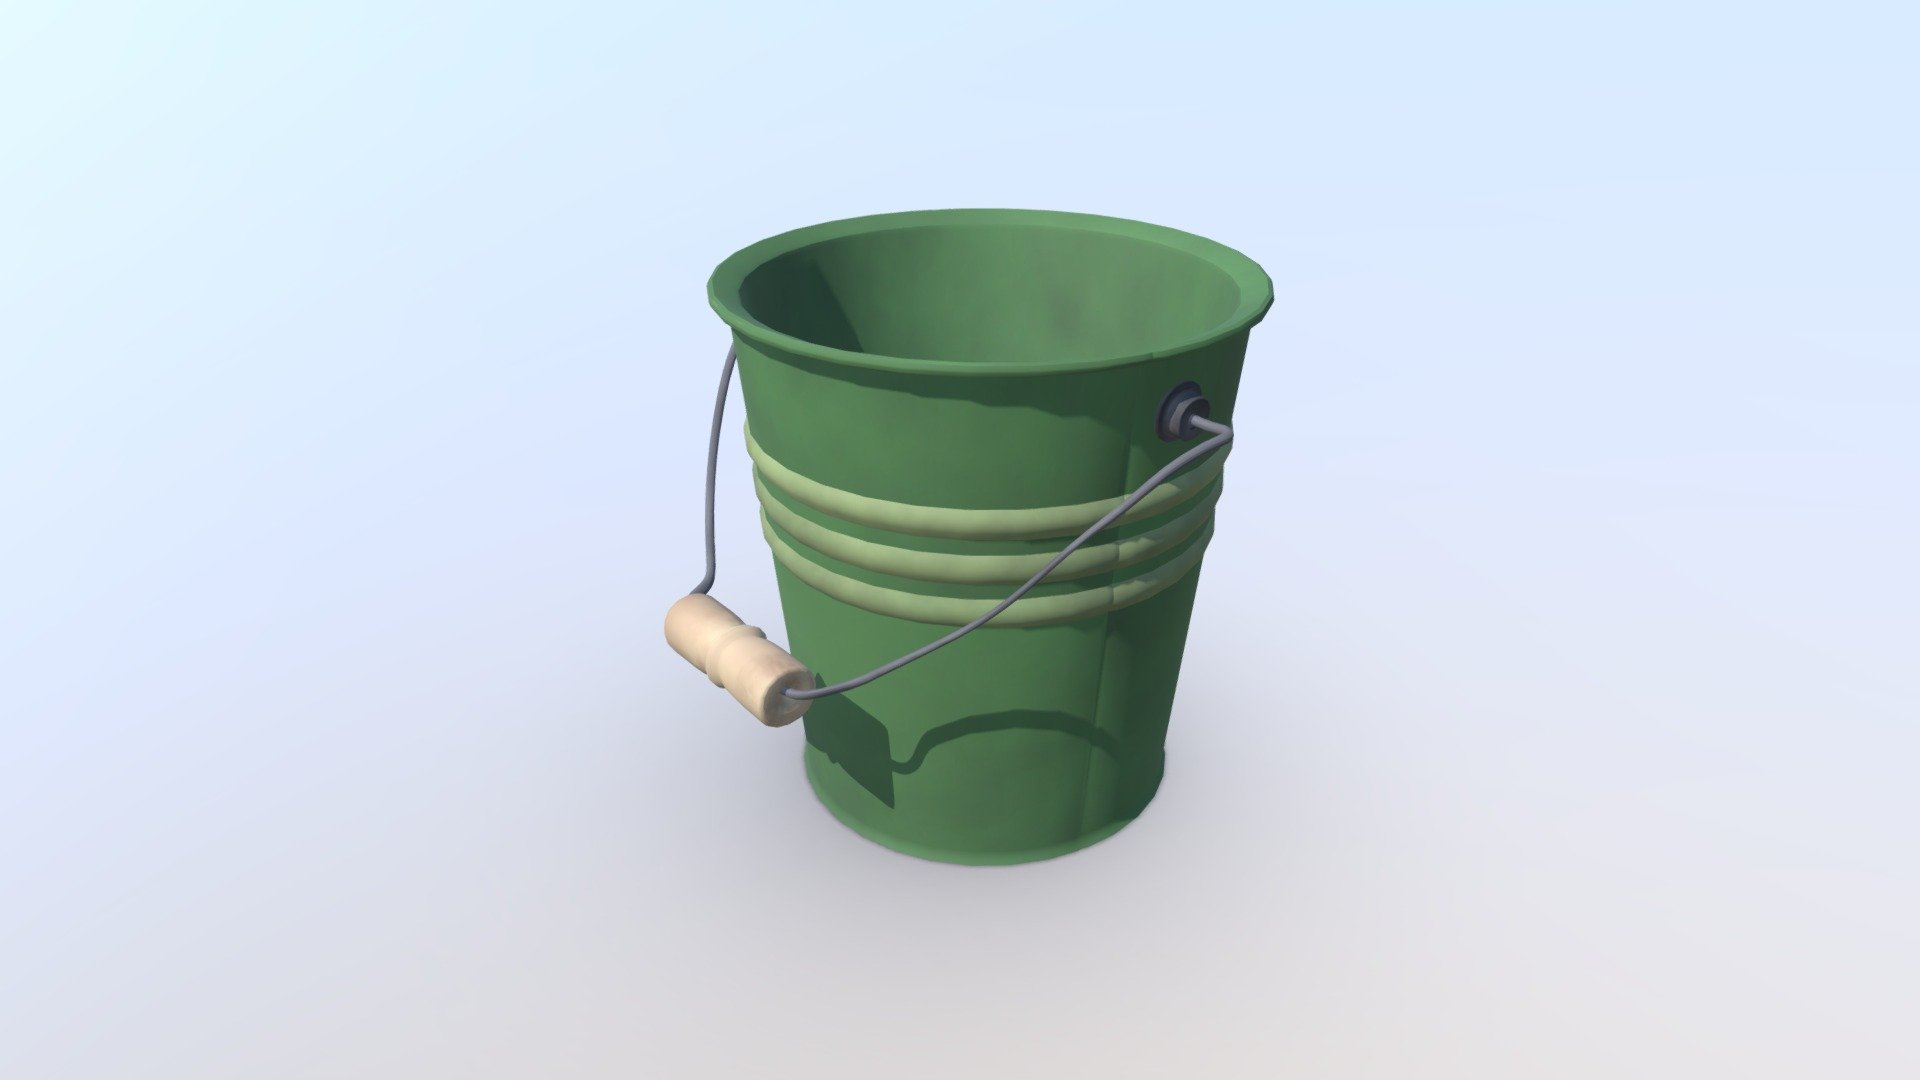 Lowpoly Bucket made for a 3D game - Bucket - 3D model by brickhario 3d model